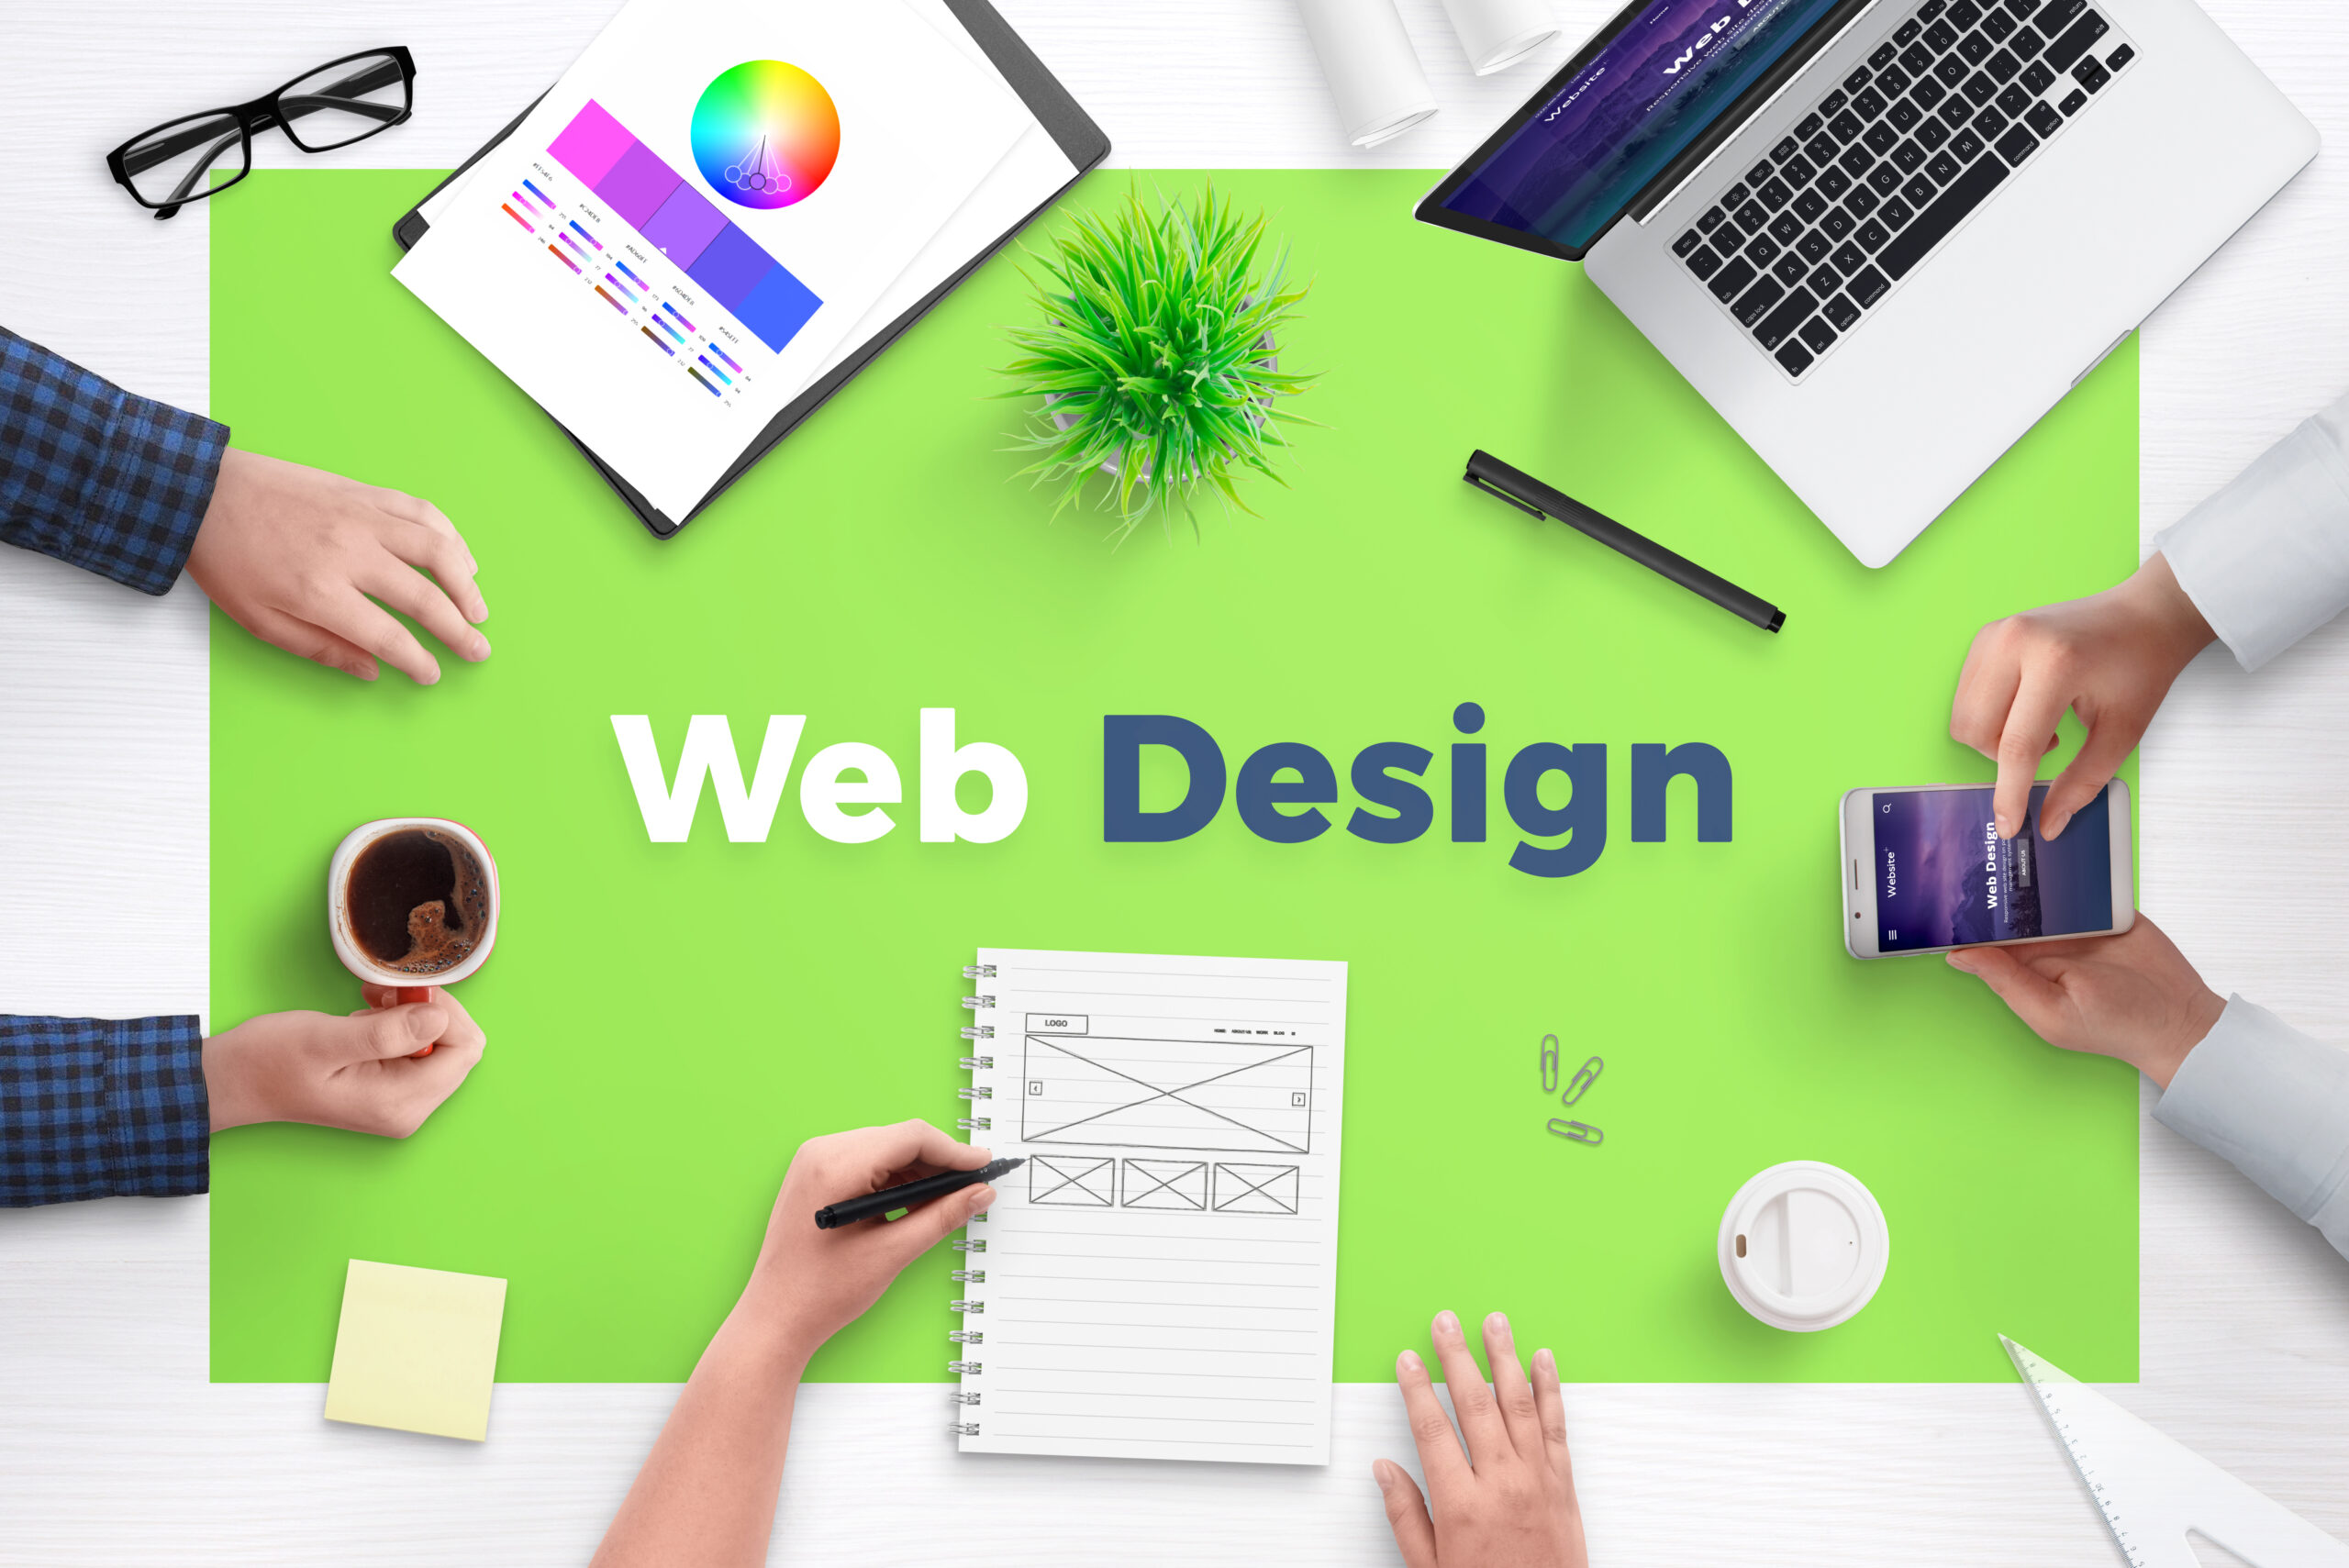 Web design text on office desk. Concept of web development team work space. Flat design flat page on laptop and smart phone.